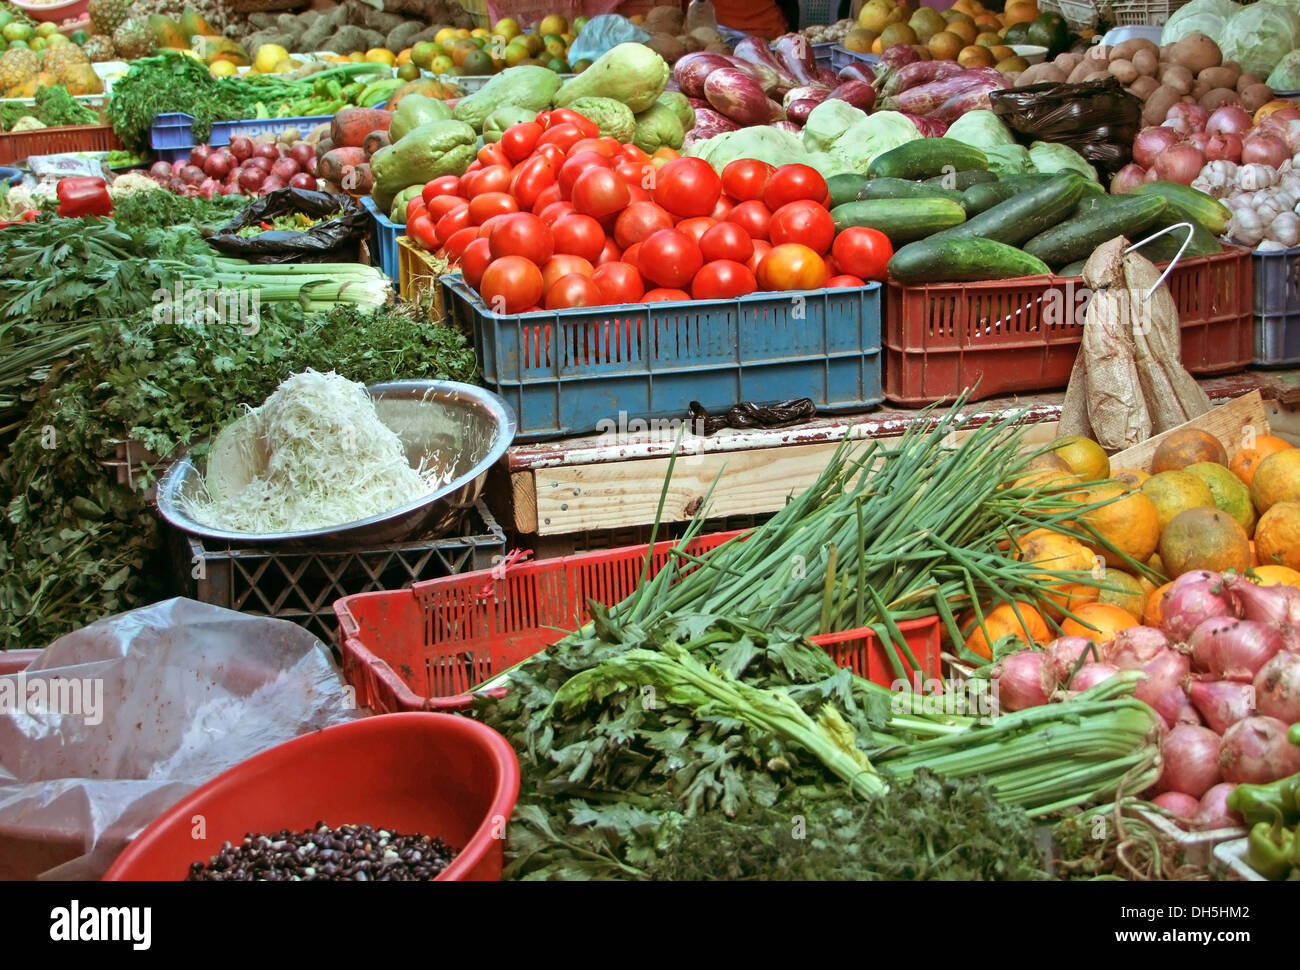 detail of a market stall with lots of various colorful fruits and vegetables Stock Photo